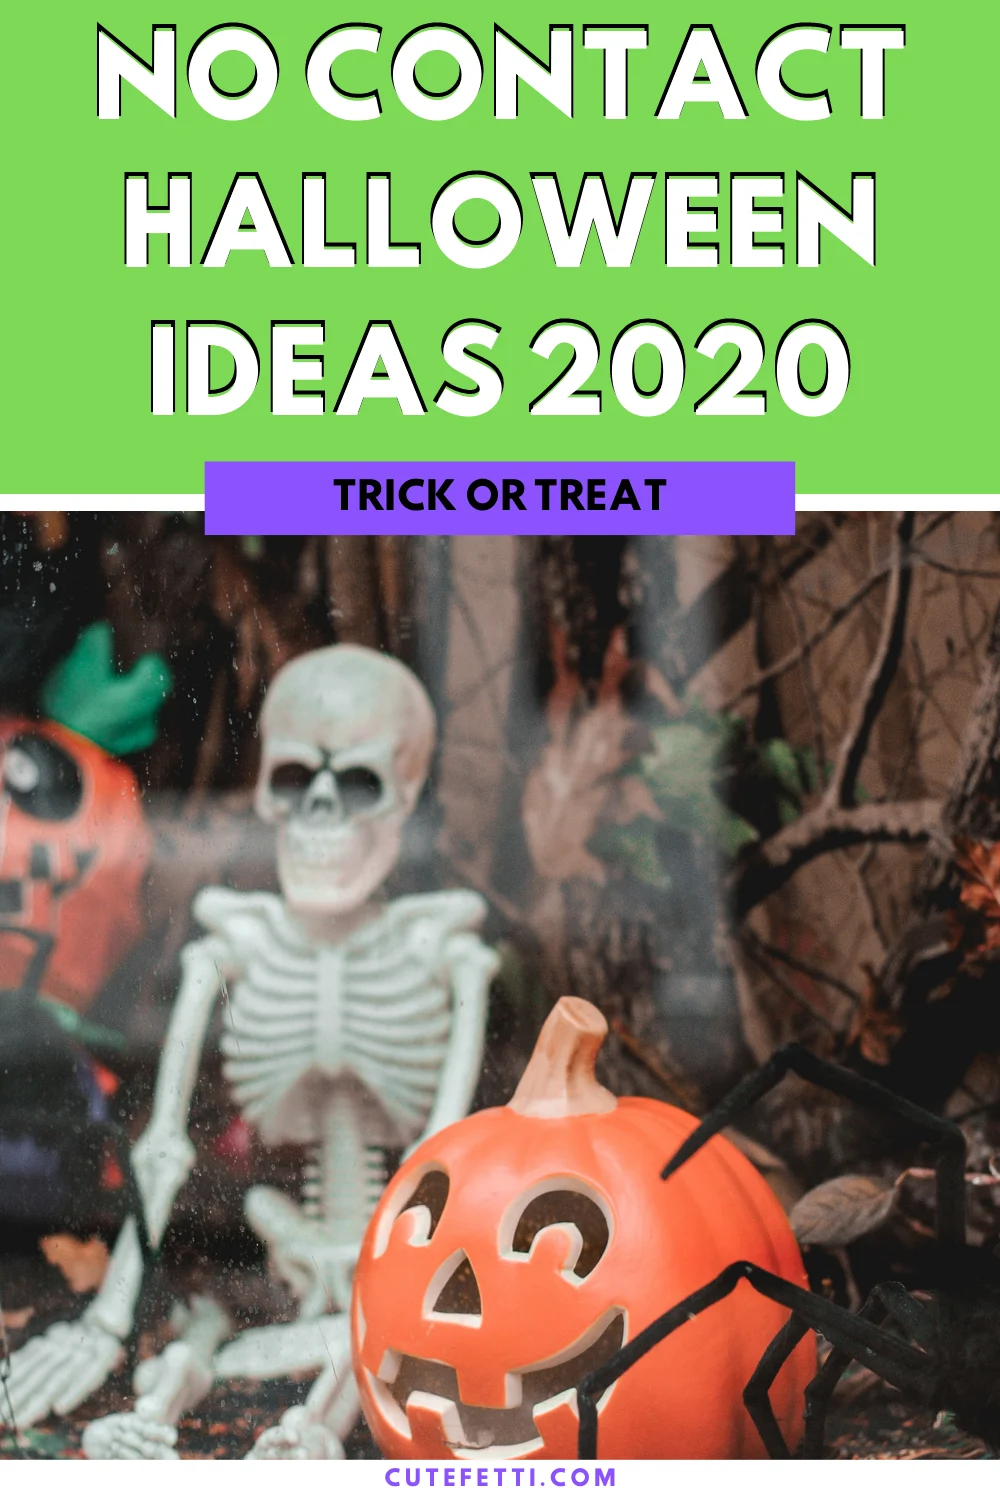 These socially distanced party ideas will let you celebrate Halloween. These trick or treat alternatives are the perfect solution this year.